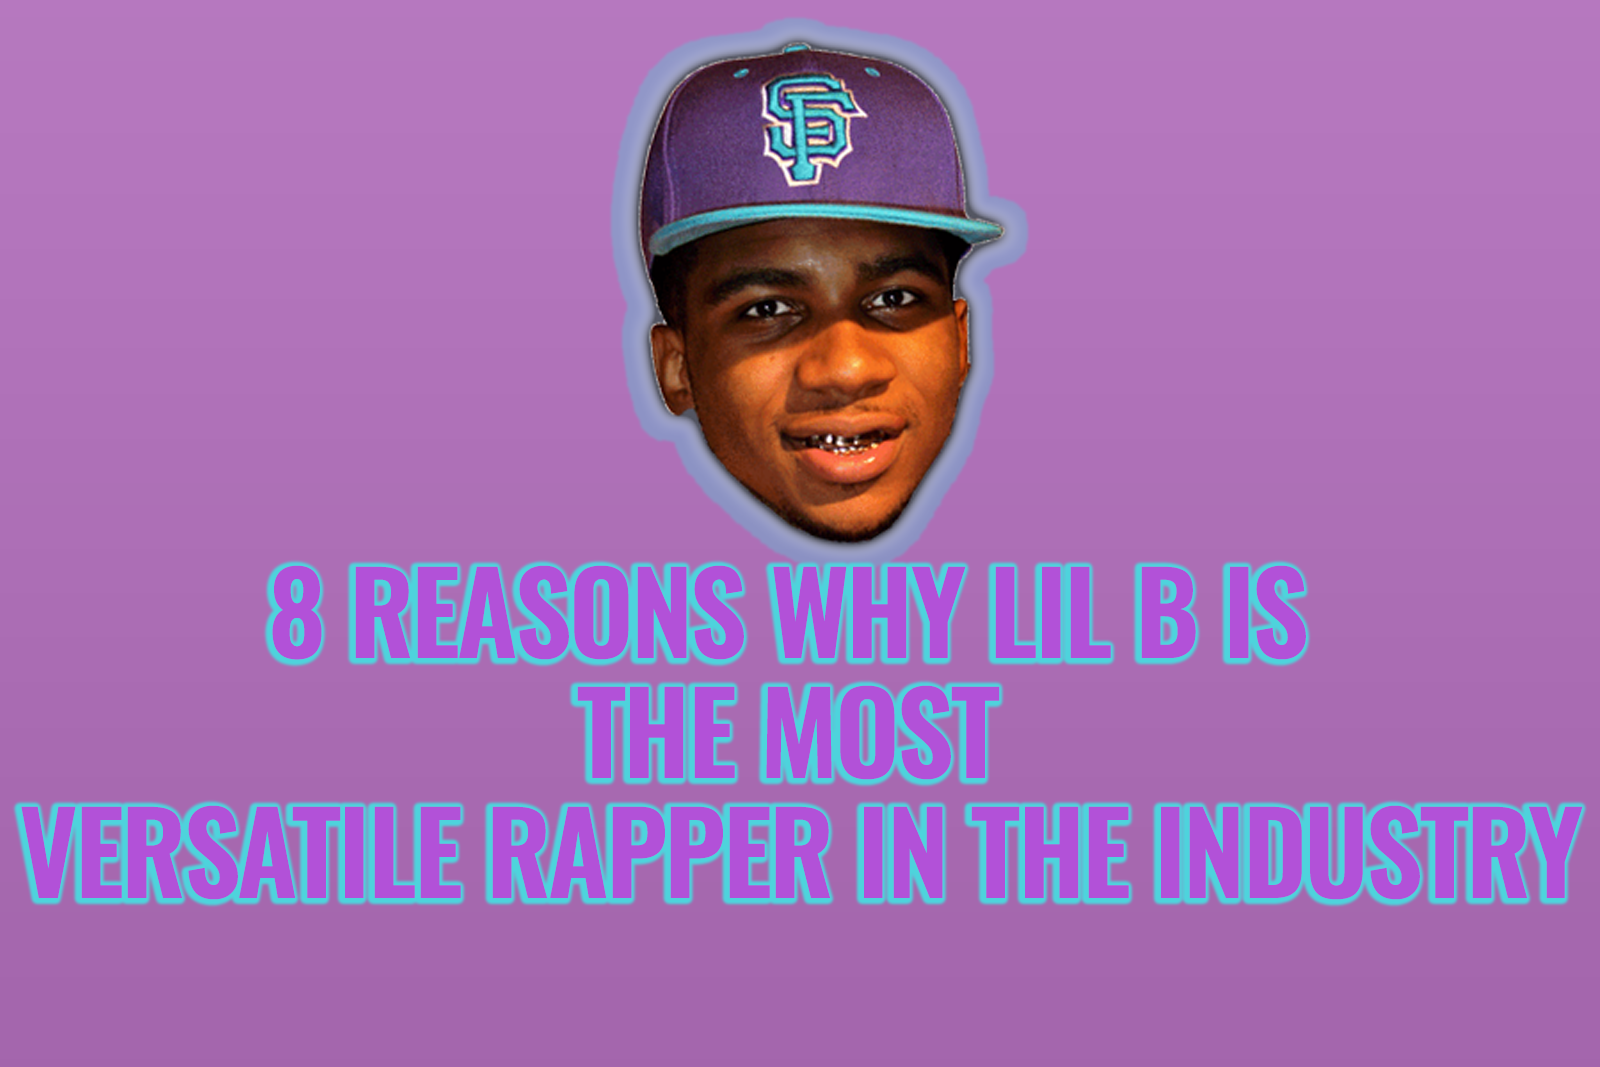 8 Reasons Why Lil B Is The Most Versatile Rapper In The Industry